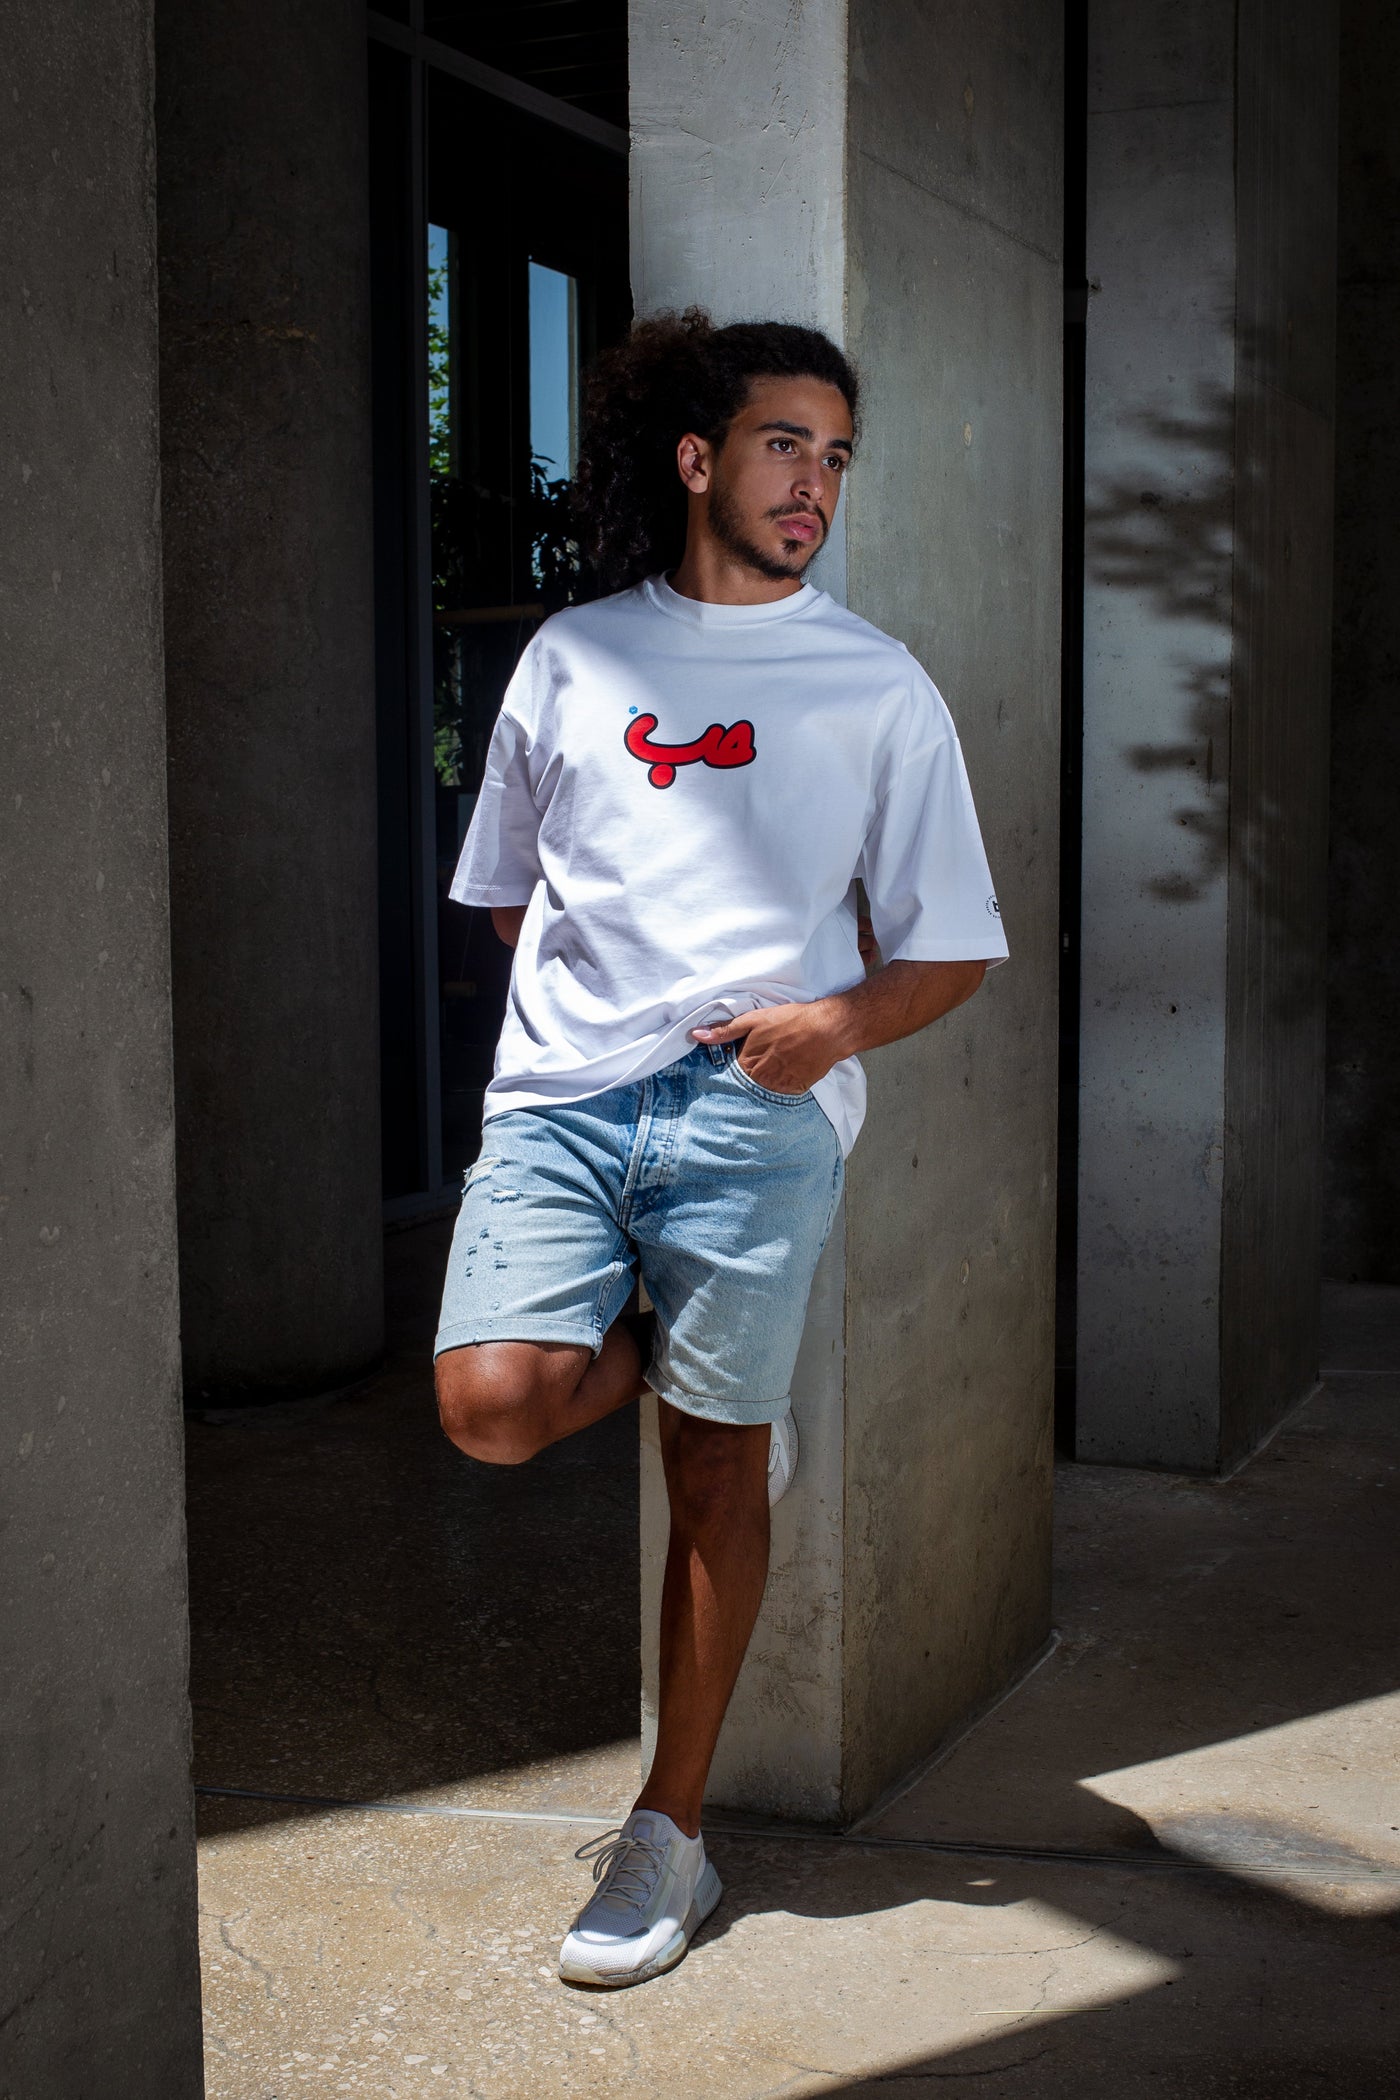 Young adult male wearing an oversized white t-shirt with Verified Hobb written in arabic حب and in red silkscreen in the center of the shirt along with jeans shorts and white sneakers.